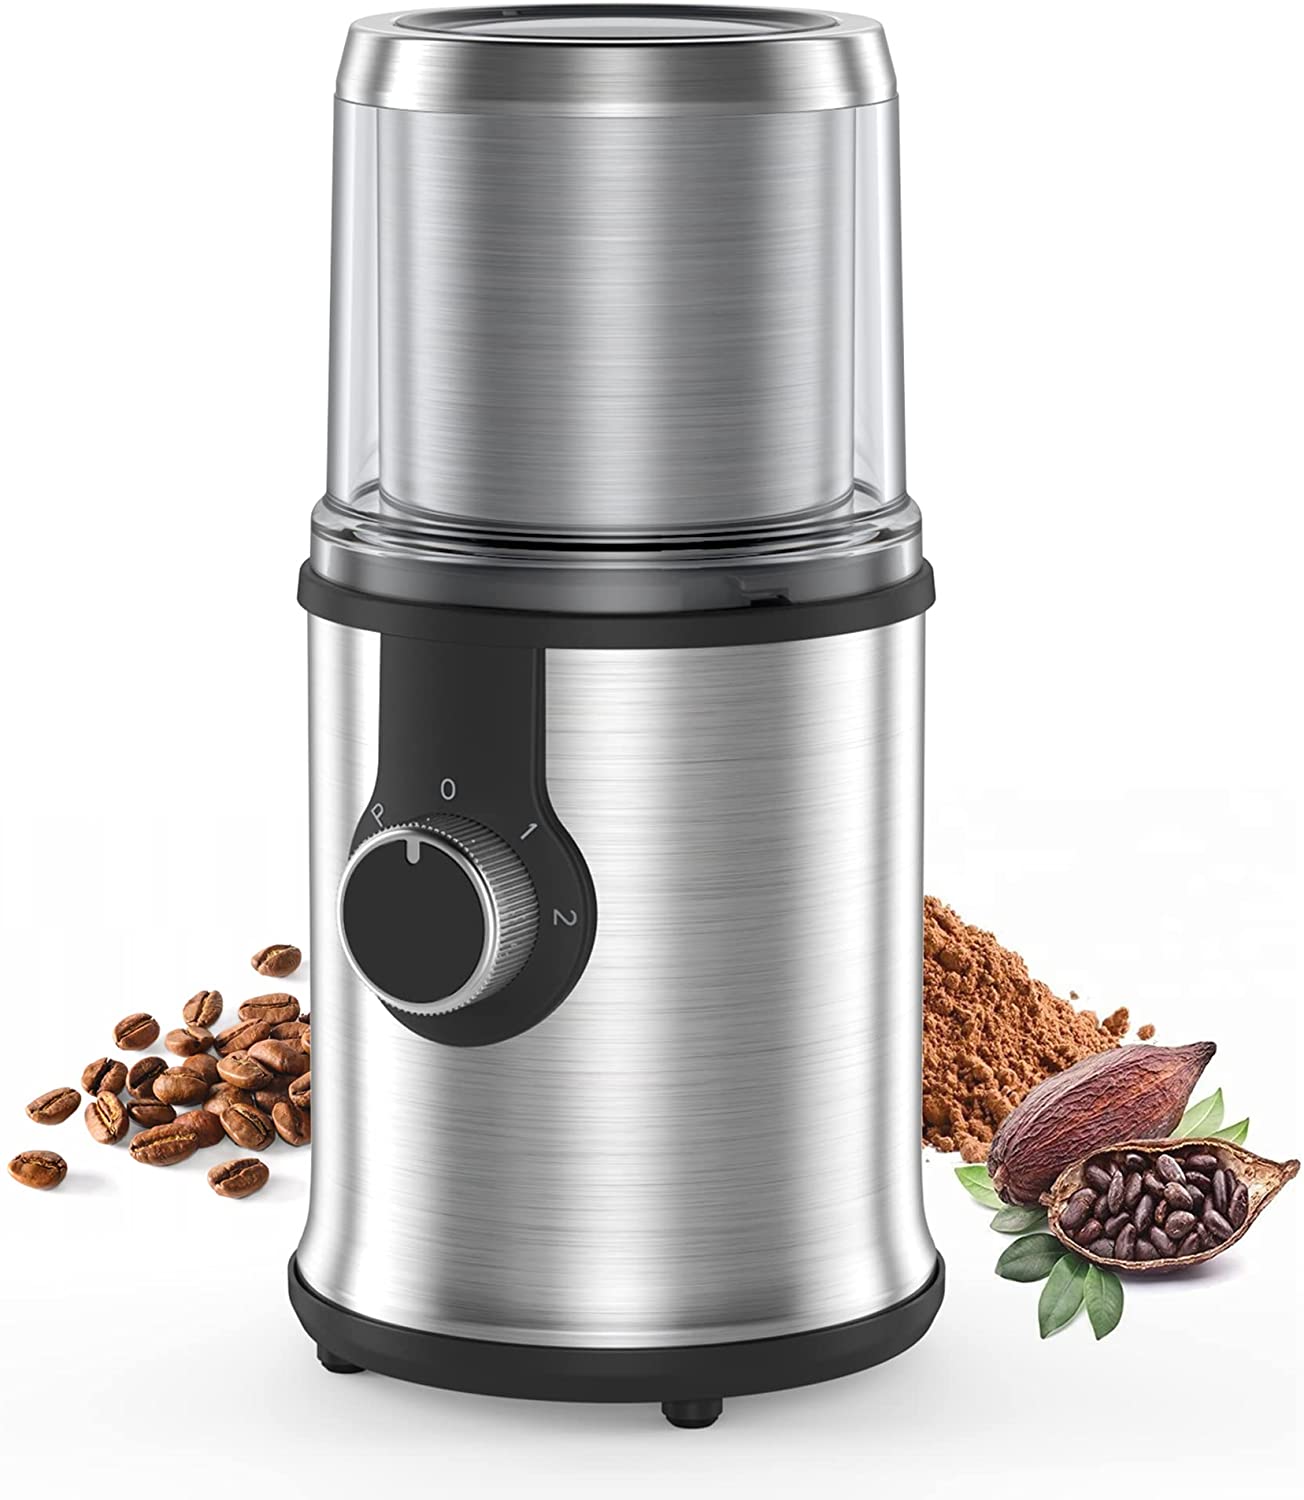 Fibonardo Electric Coffee Grinder with Removable Cup, 350 W Electric Spice Mill for Coffee Beans, Seeds, Herbs, Spices, Stainless Steel Coffee Grinder with Non-Slip Feet & Anti-Splash Sealing Ring, Clear Lid